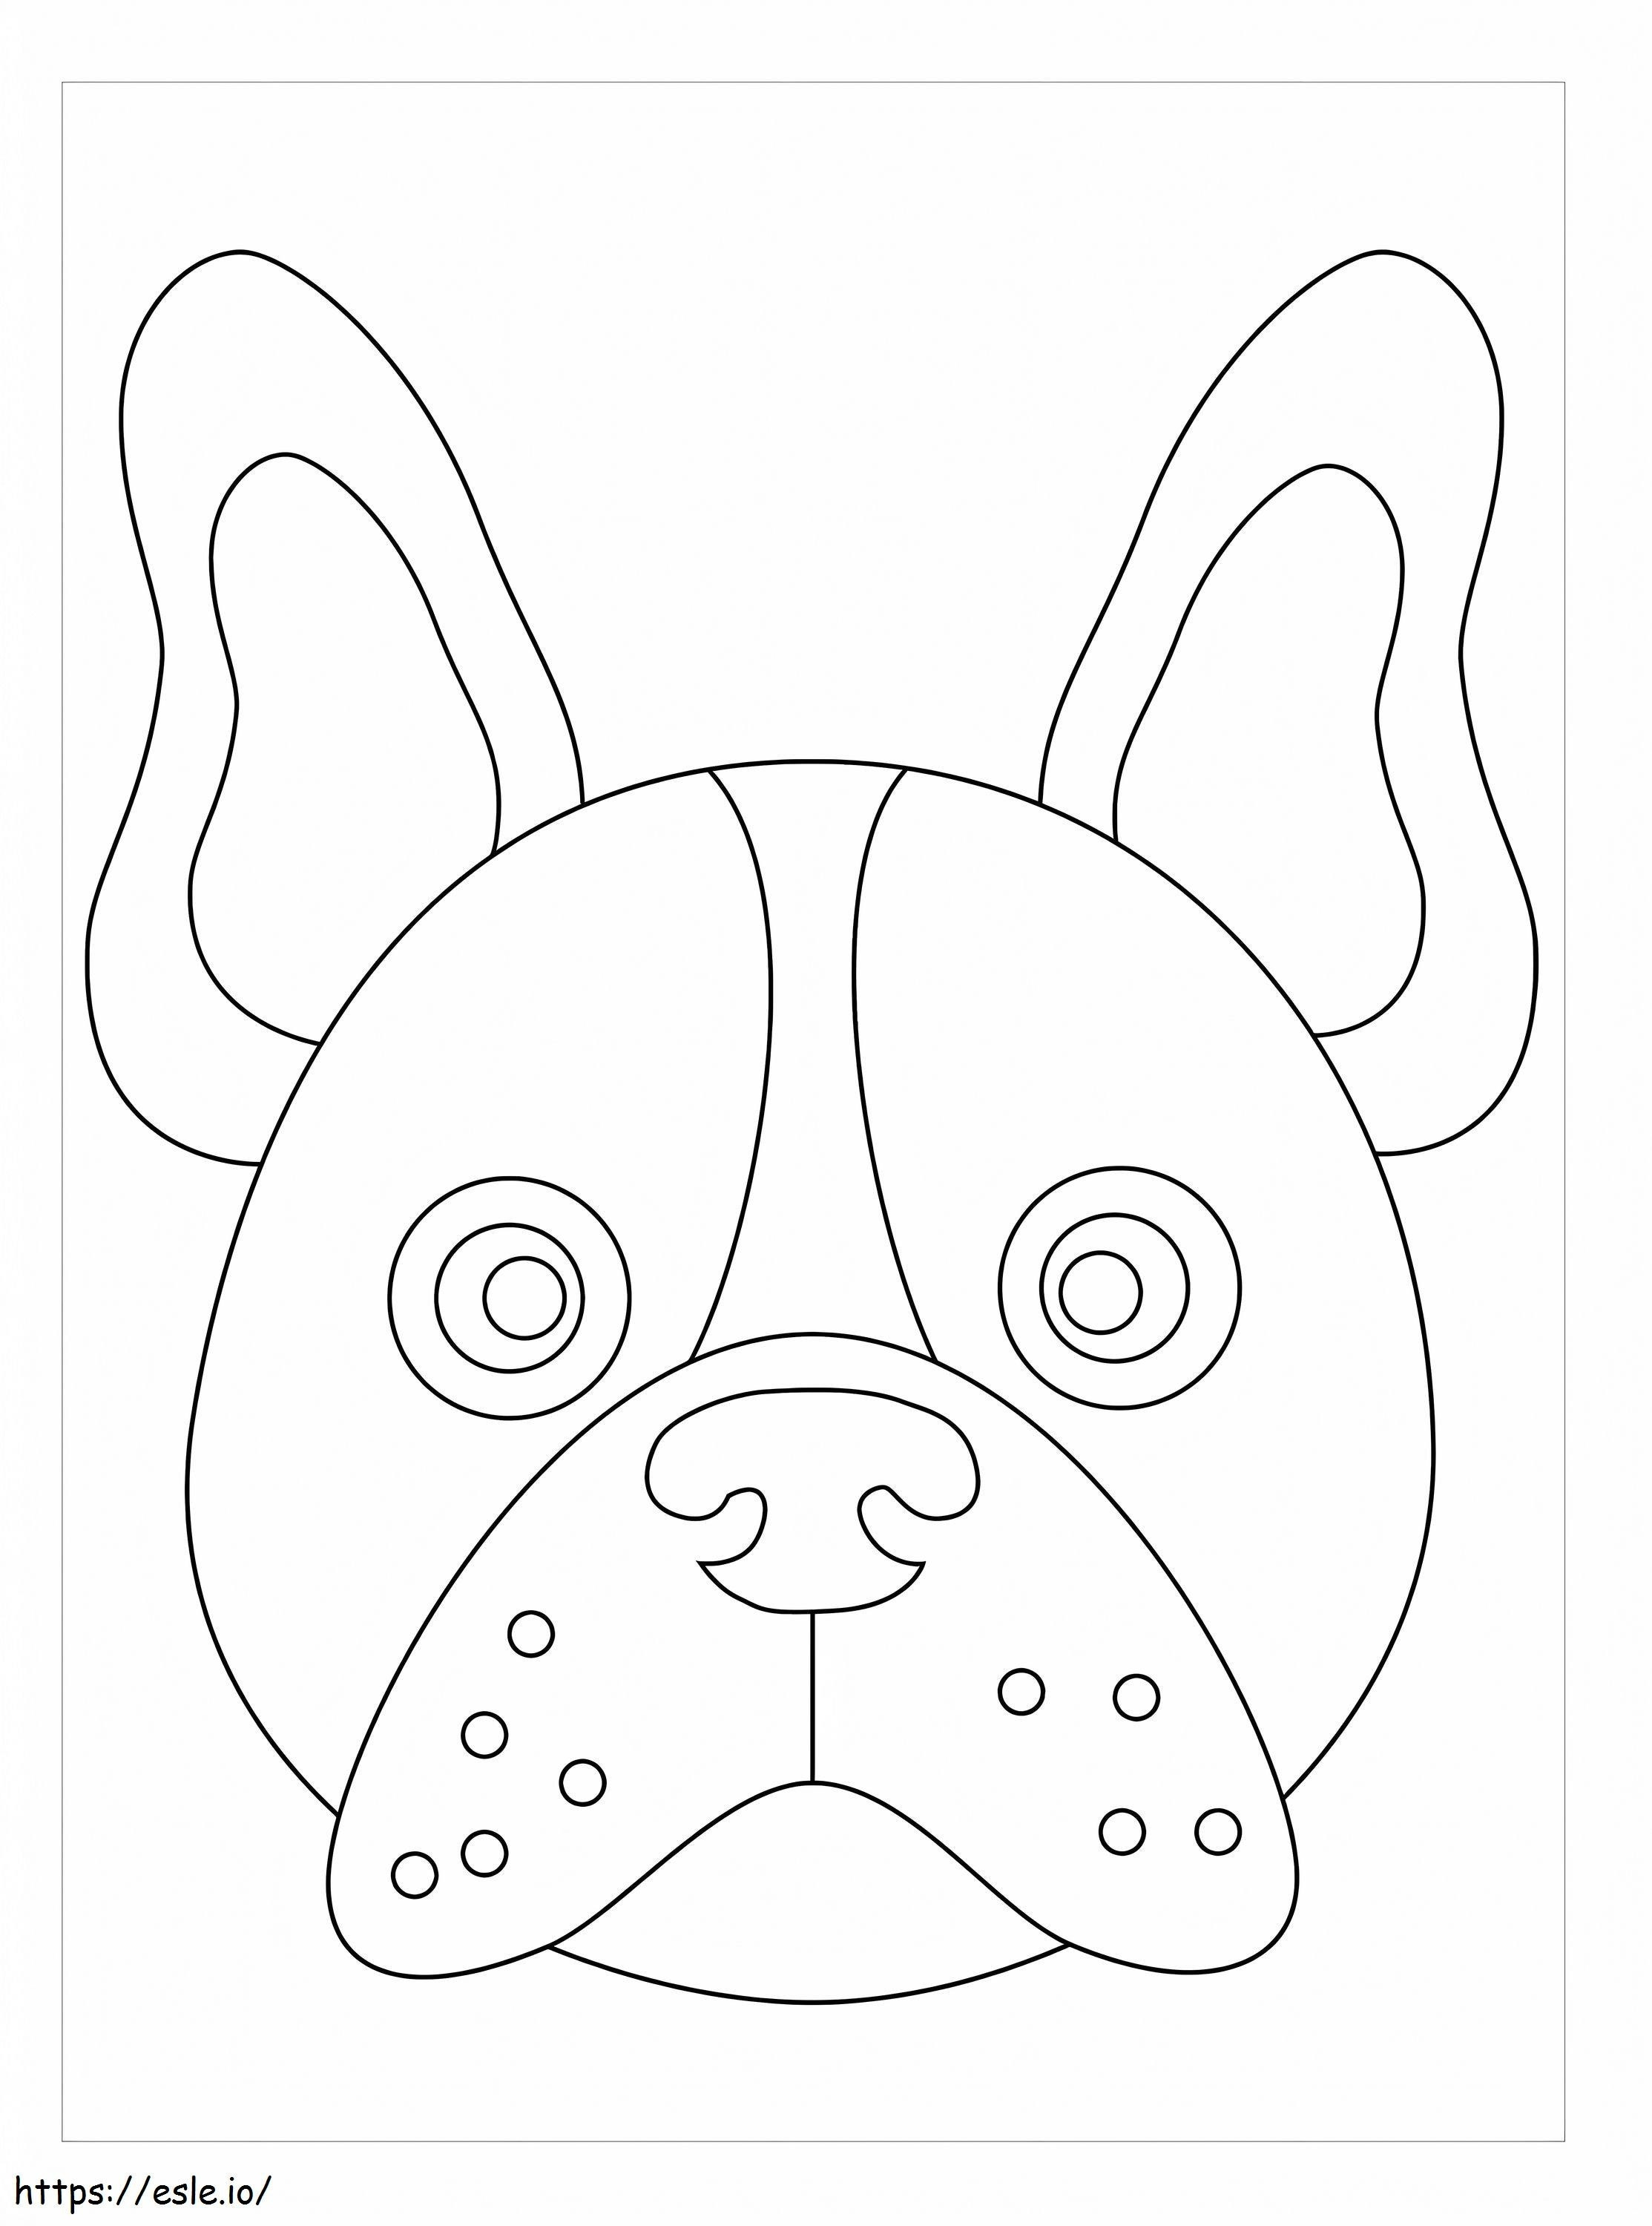 French Bulldog Head coloring page